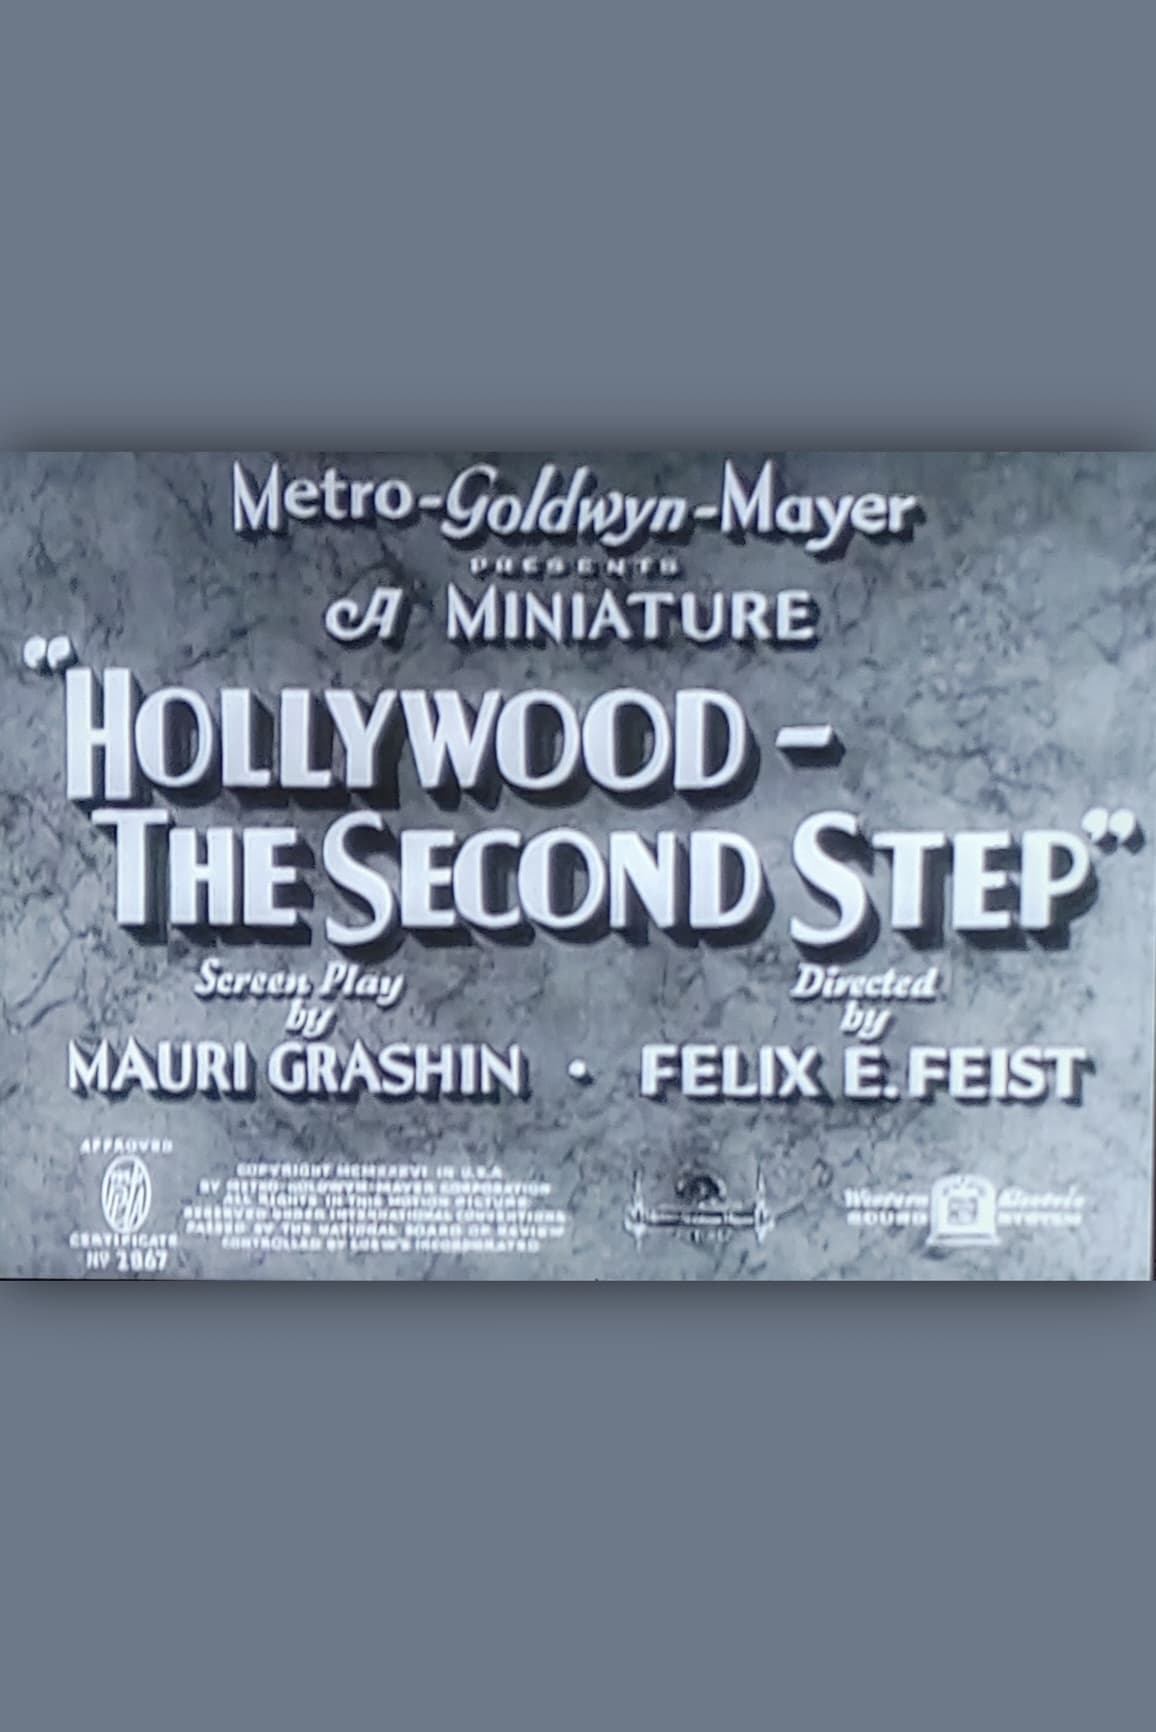 Hollywood - The Second Step